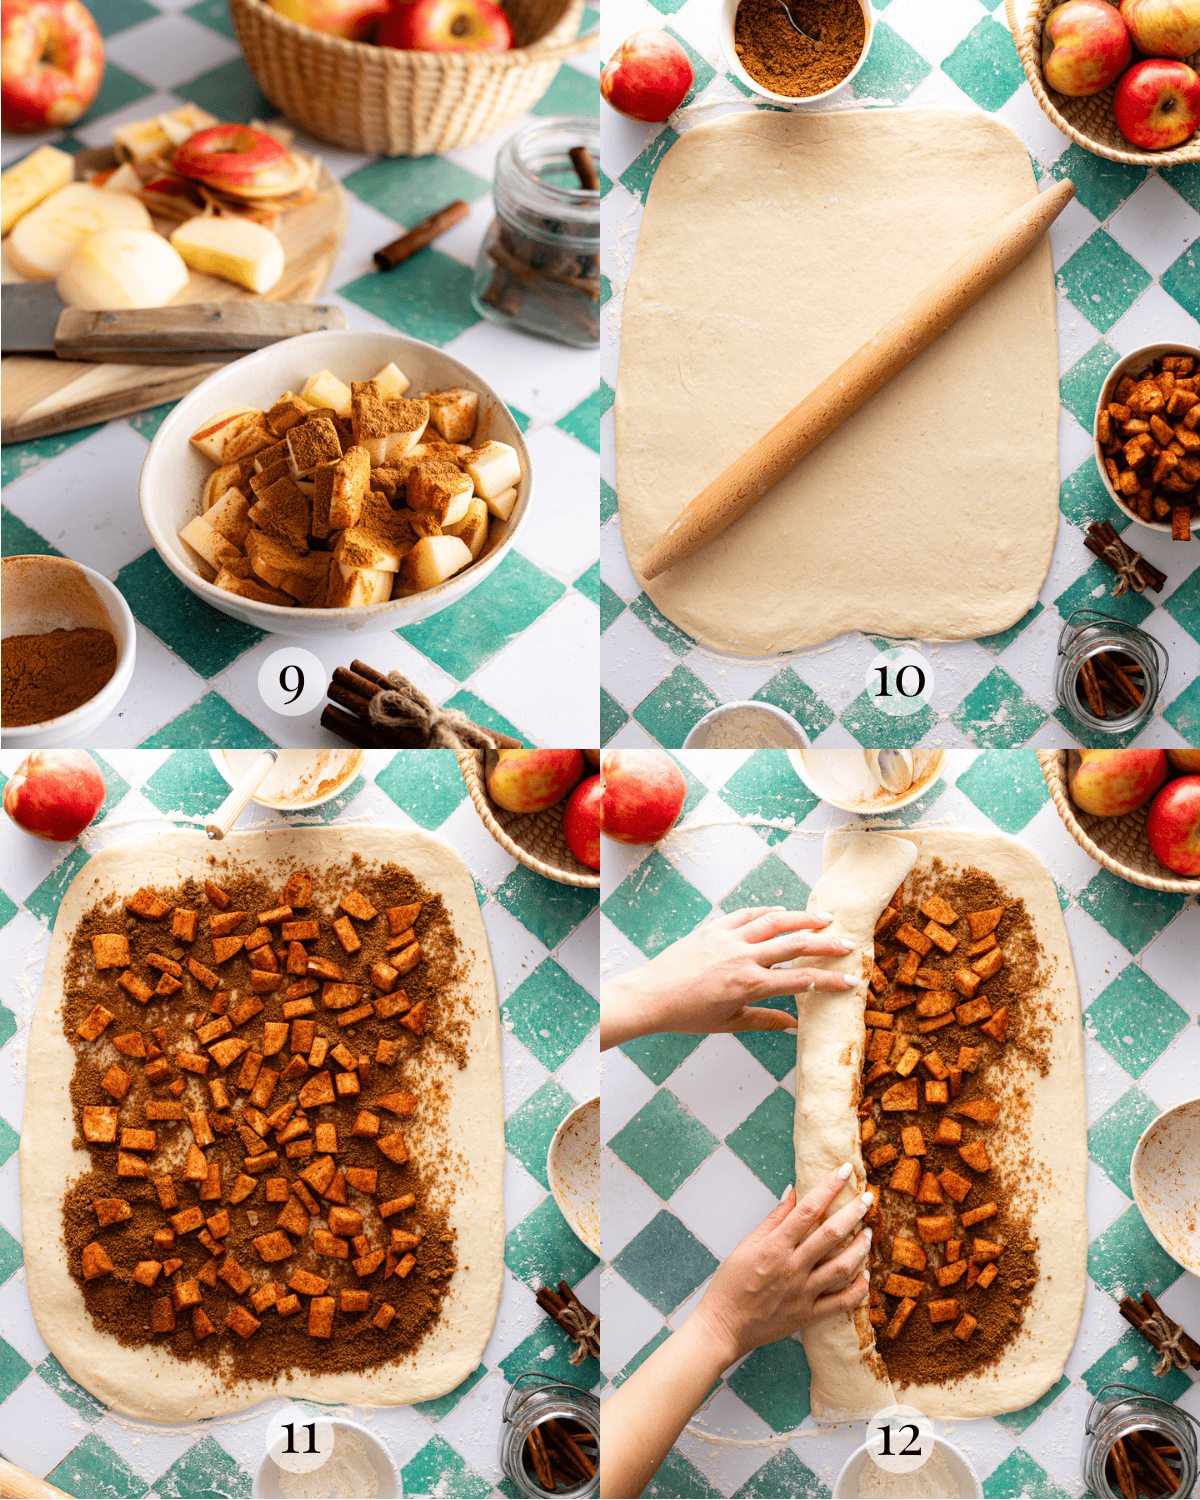 4 photo series filling cinnamon roll dough with apples and sugar.